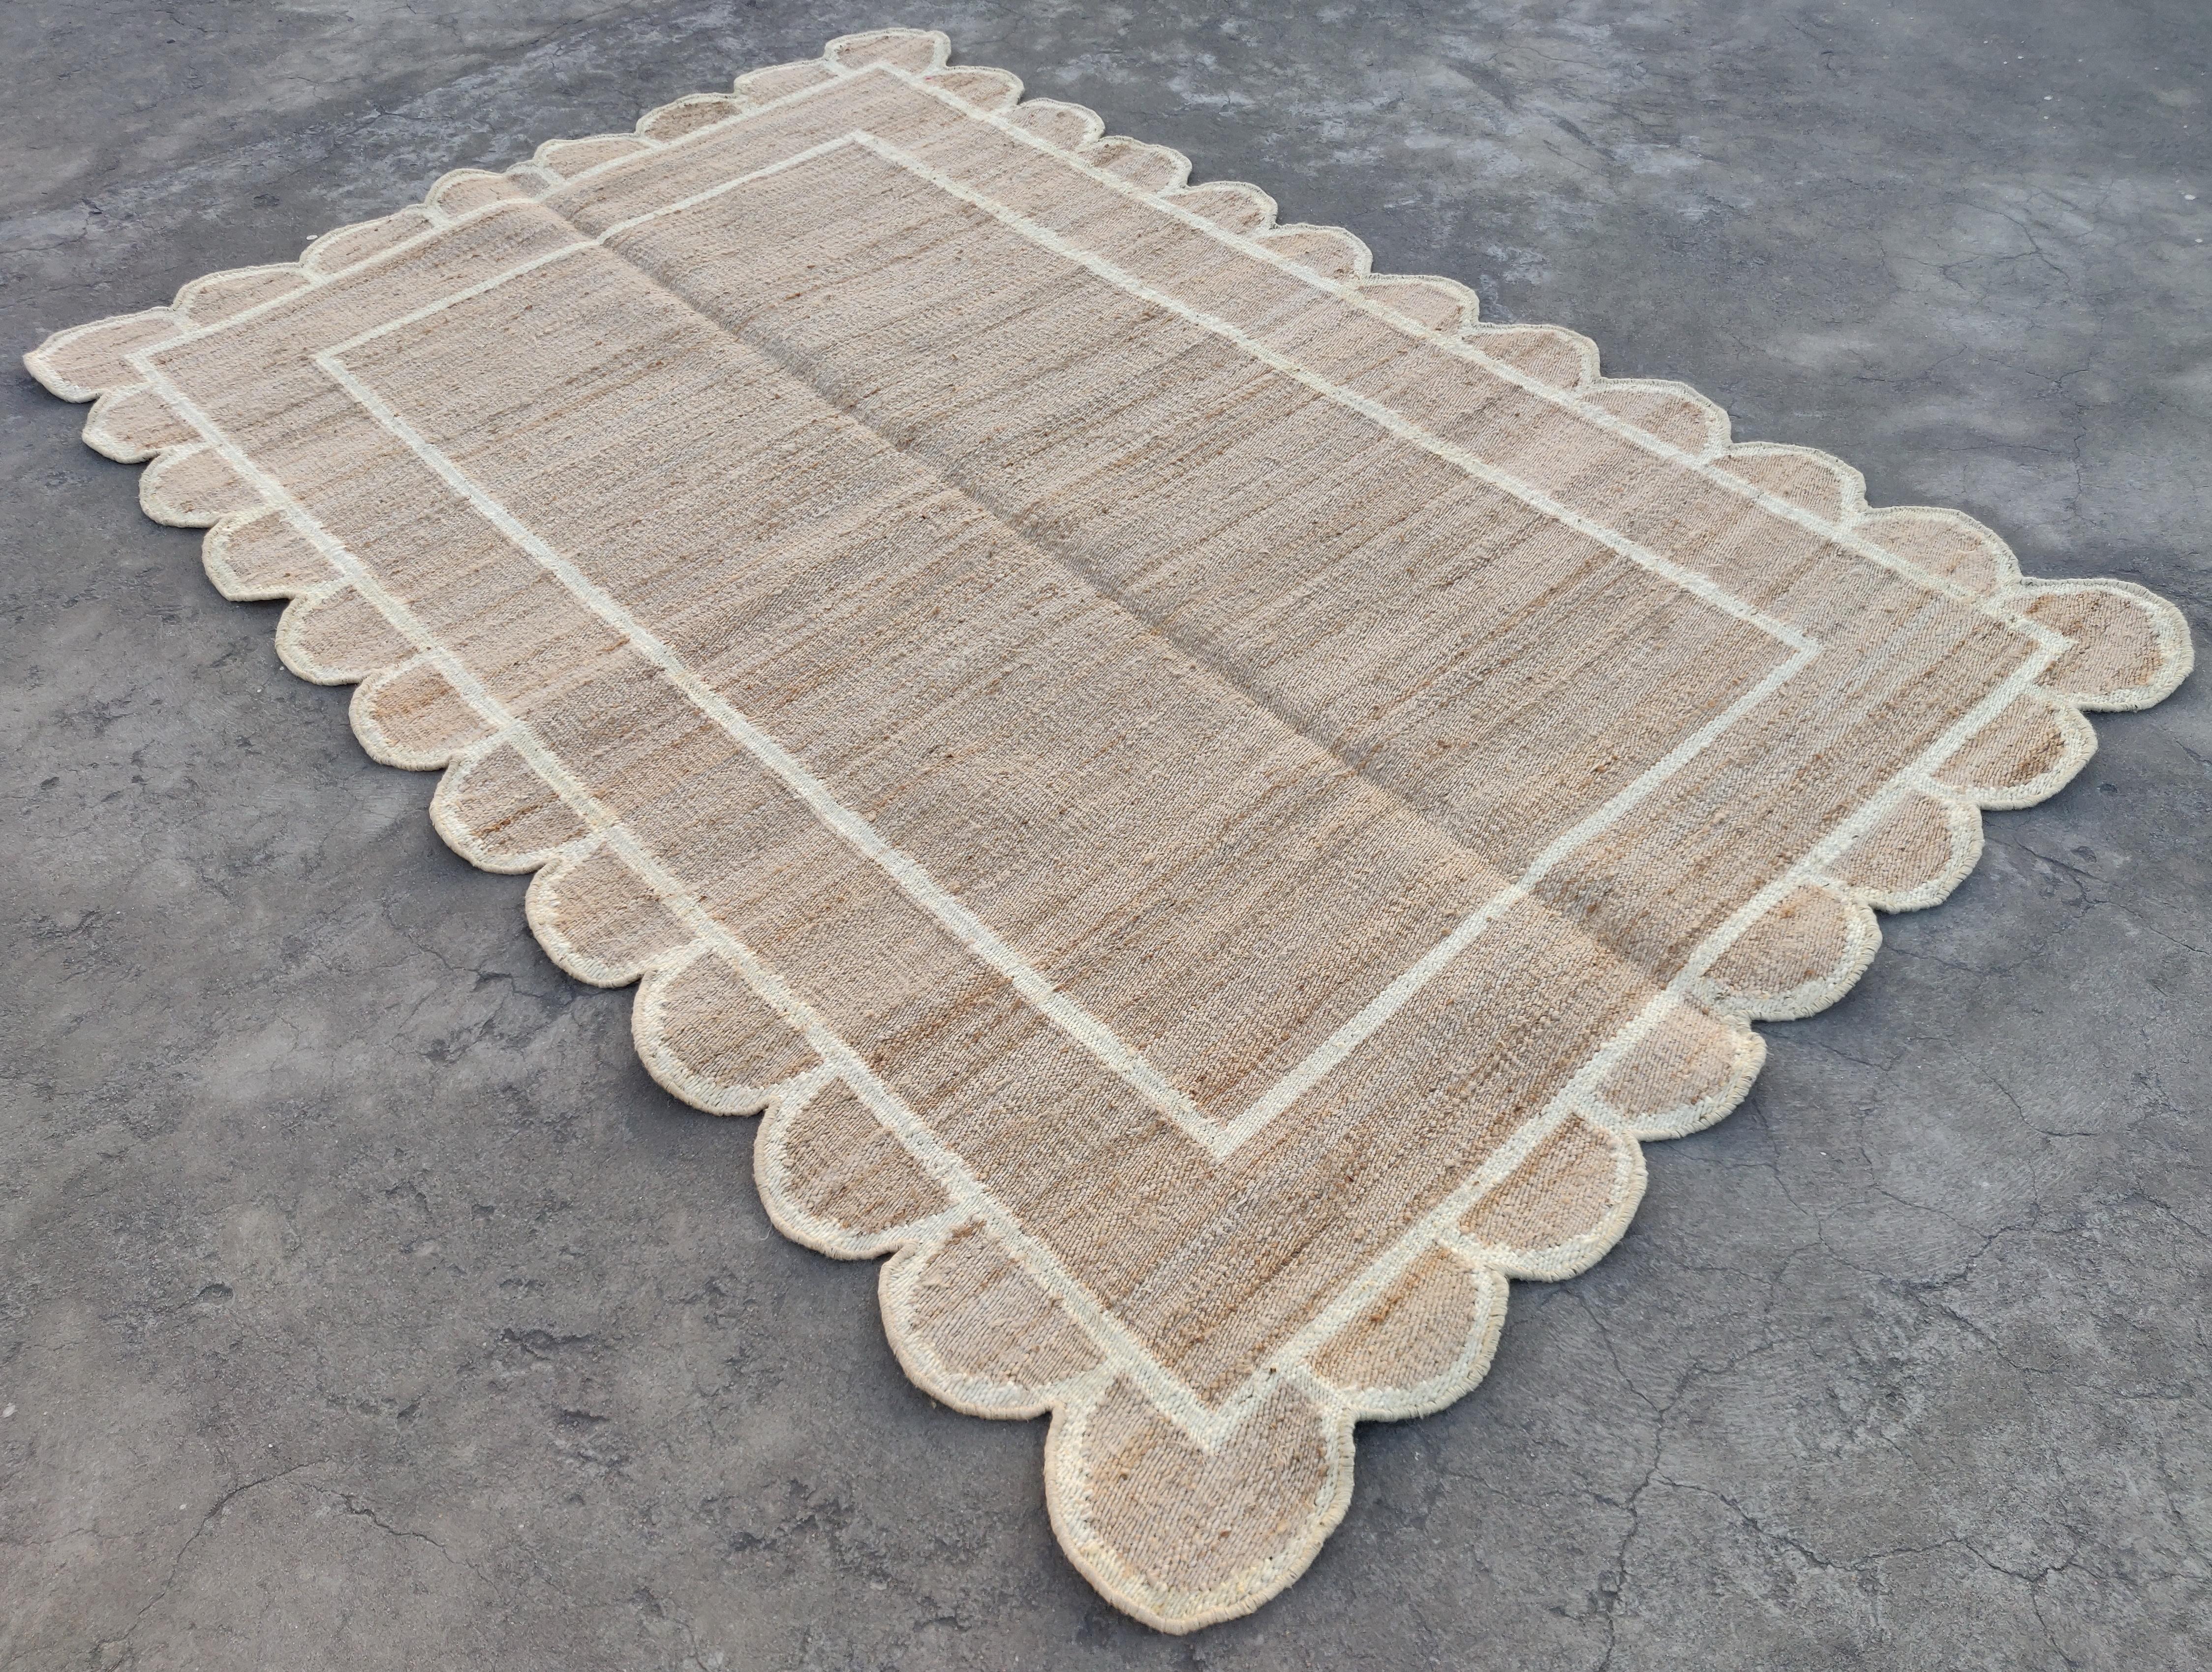 Handmade Jute Scalloped Rug, Natural Jute And Antiqued White Bordered Indian Dhurrie -4'x6'

These special flat-weave dhurries are hand-woven with 15 ply 100% cotton yarn. Due to the special manufacturing techniques used to create our rugs, the size